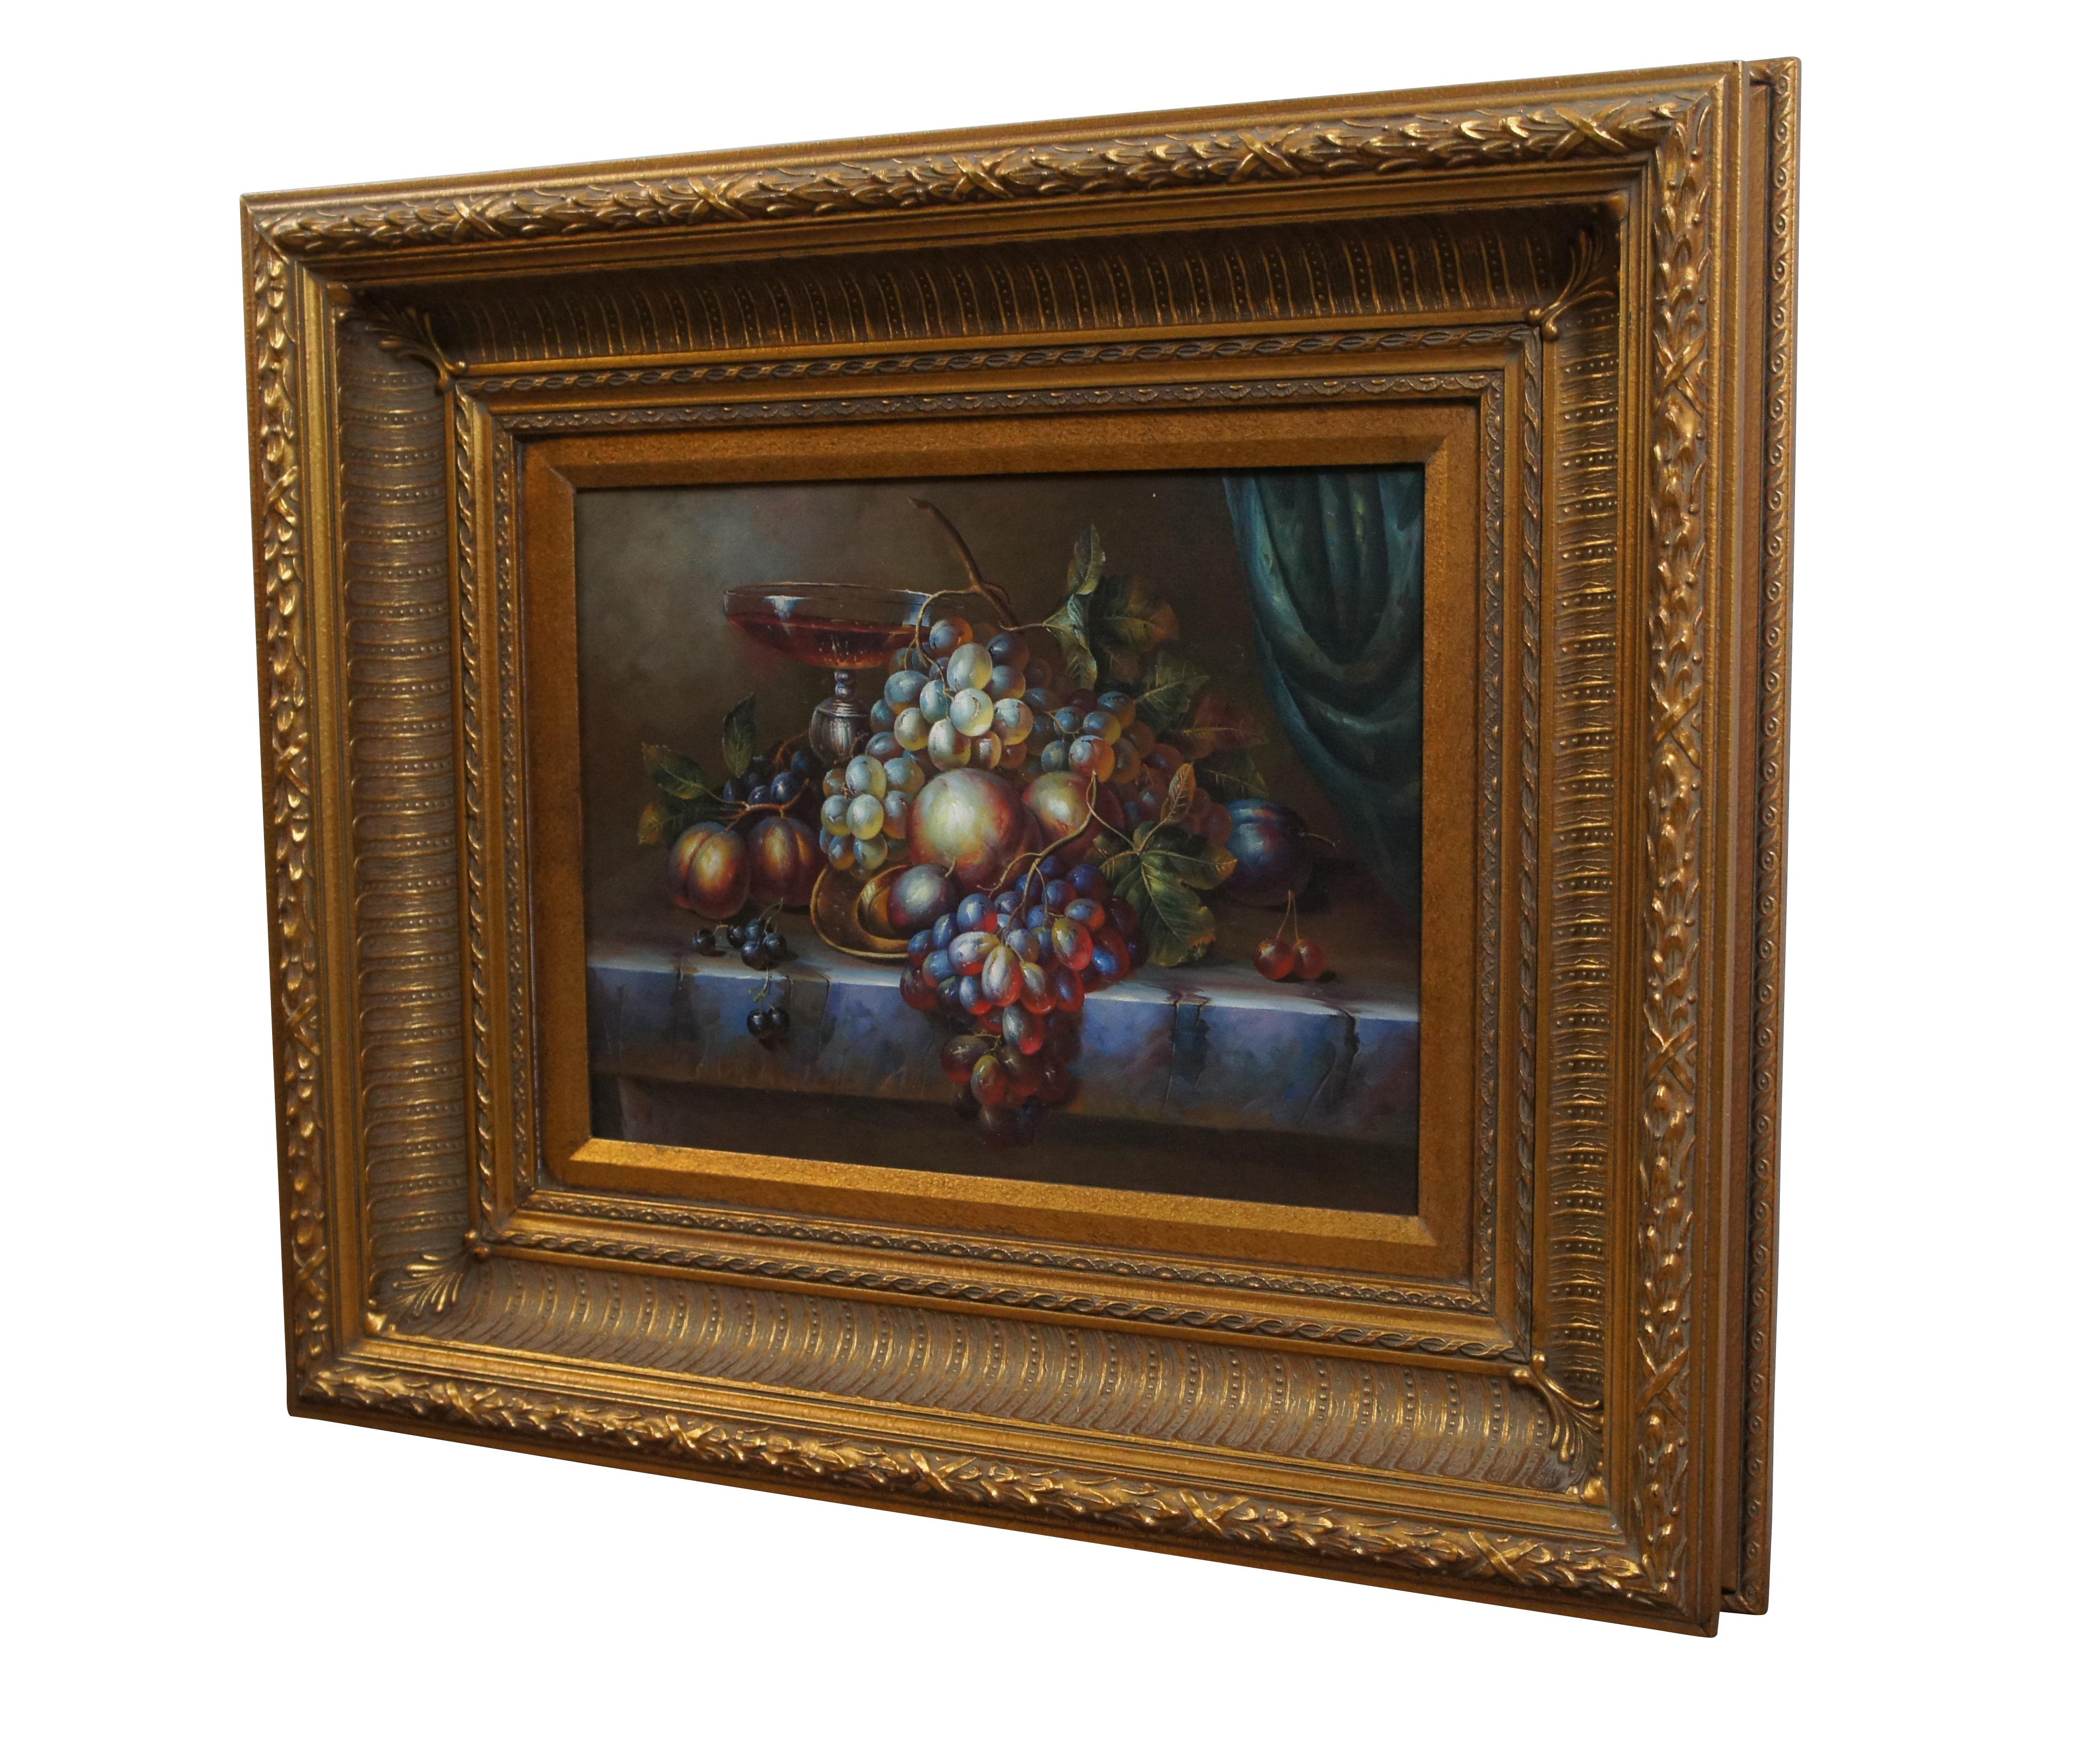 Late 20th century oil painting on canvas featuring a still life of grapes, peaches and plums and a goblet of wine on a stone table. Displayed in an elegantly carved gold gesso frame.

Dimensions:
26.75